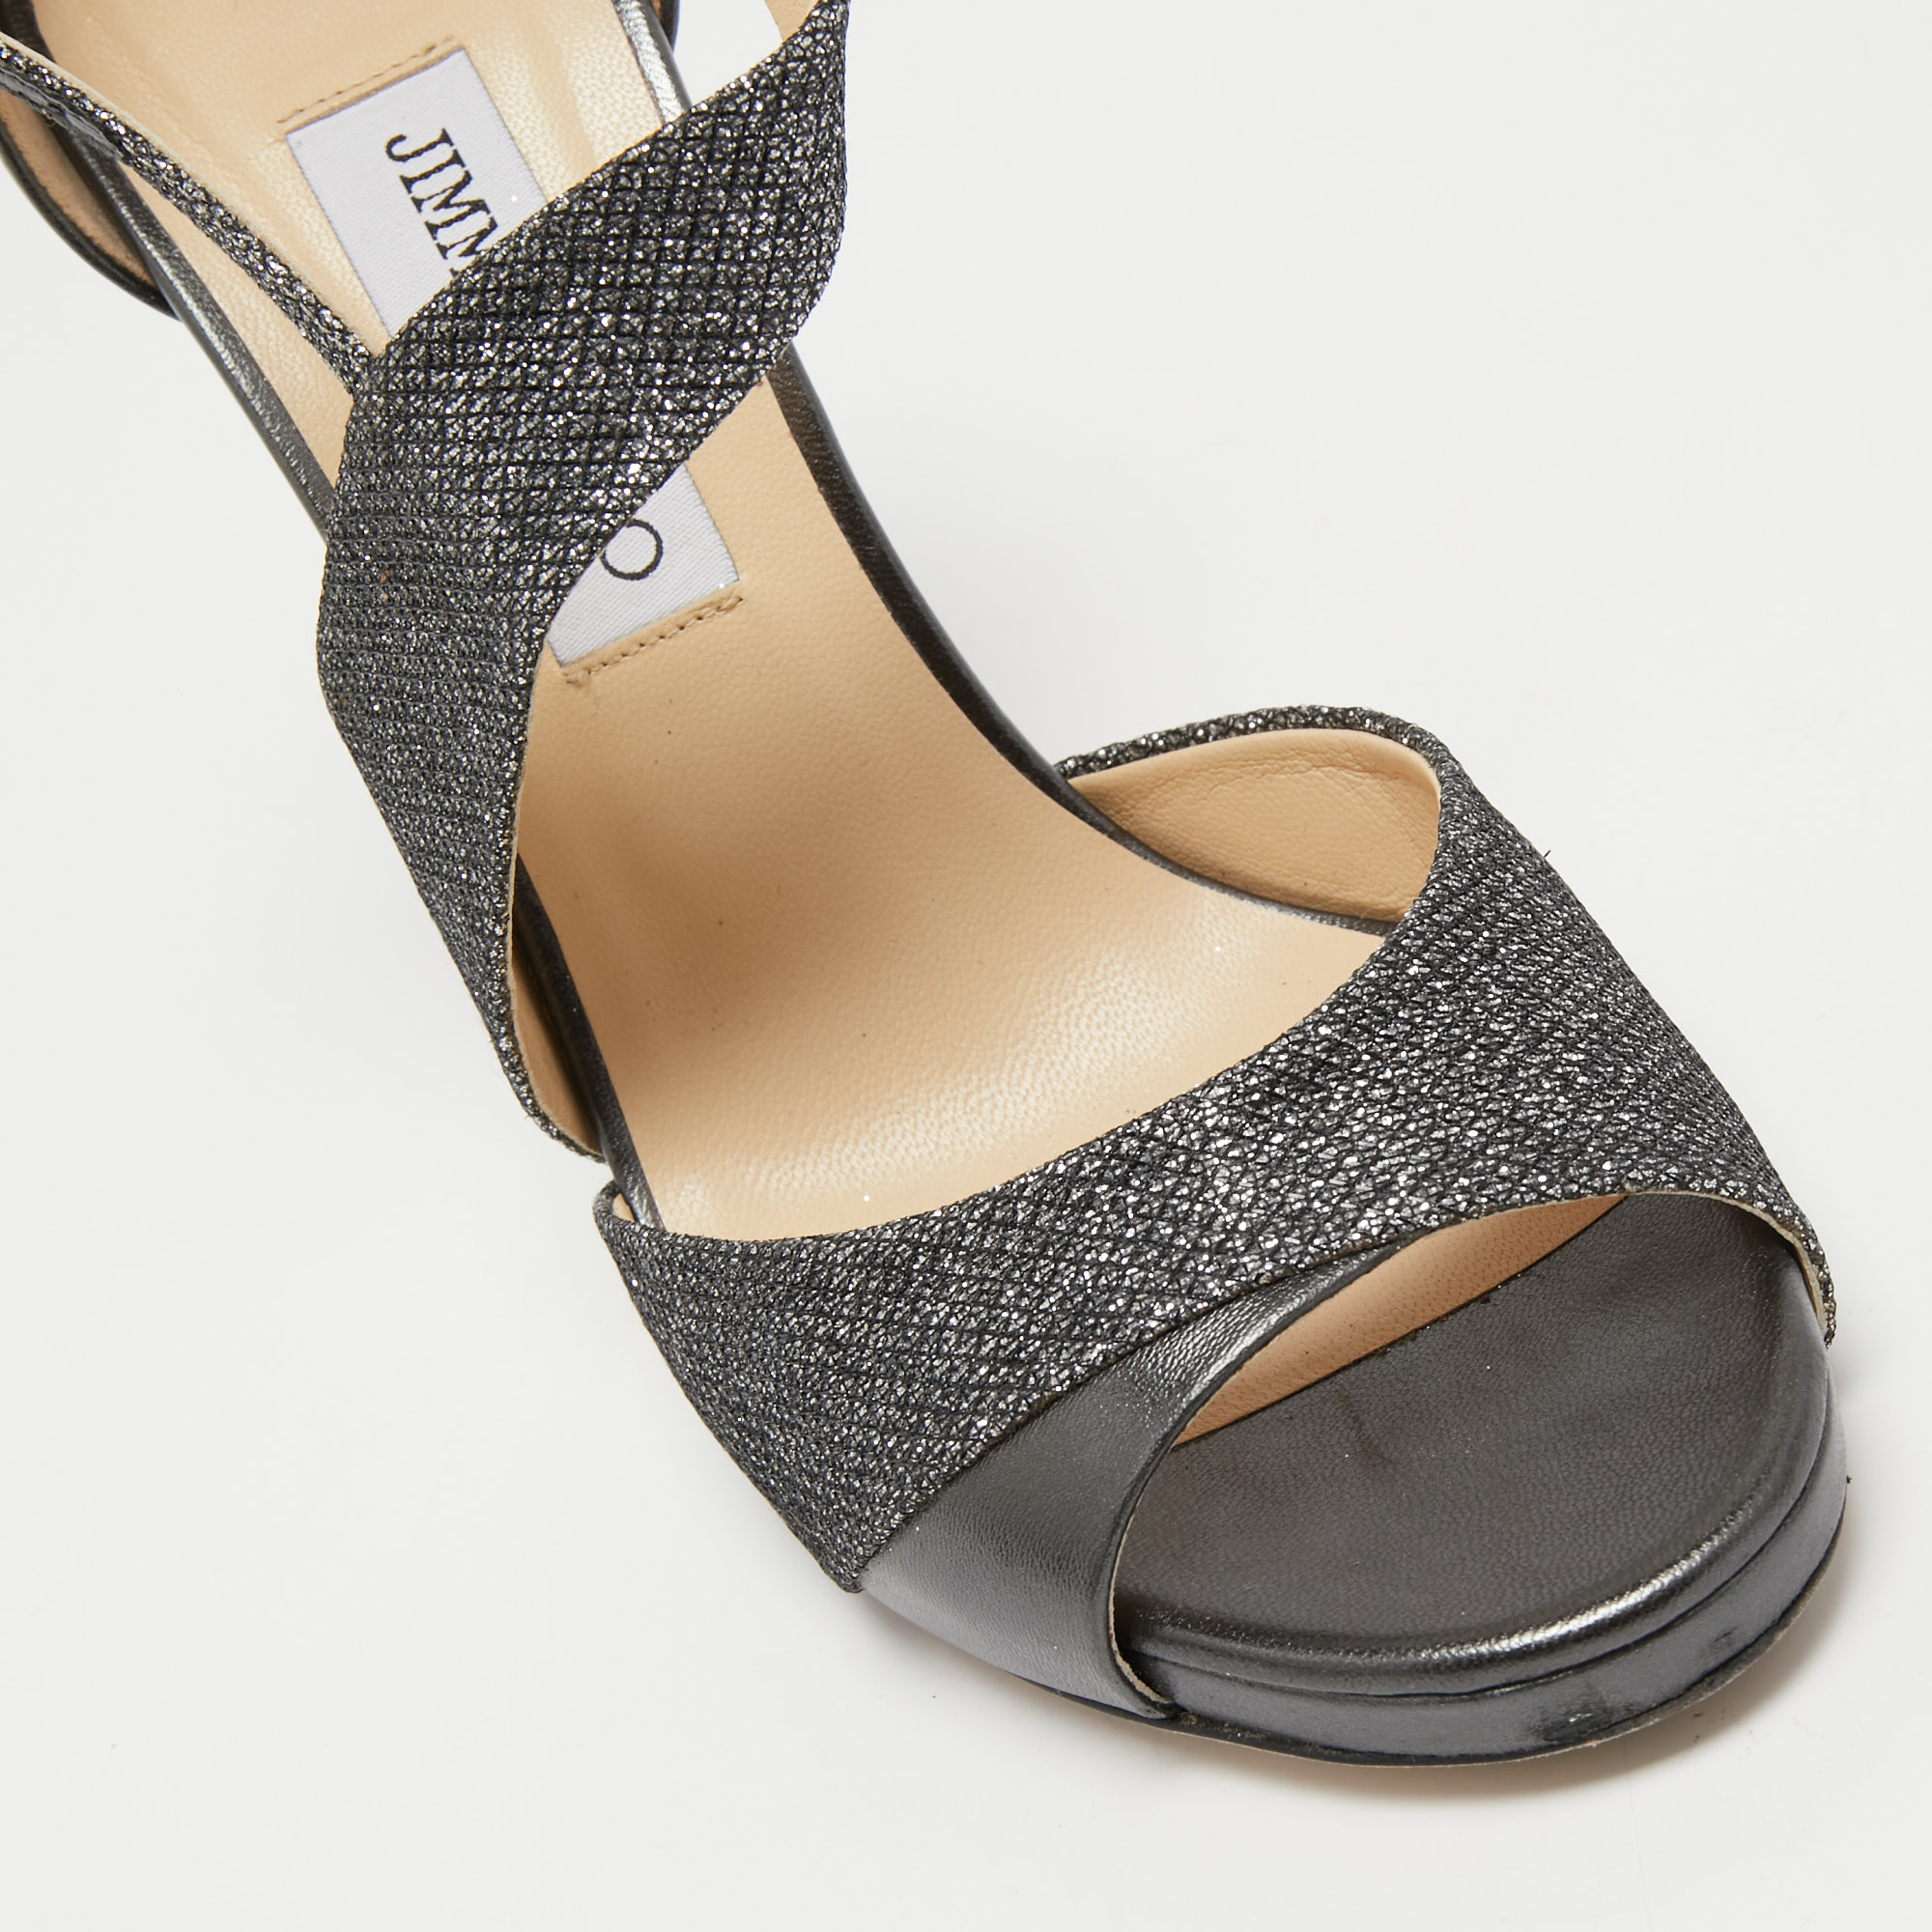 Jimmy Choo Metallic Grey Lurex Fabric And Leather Ankle Strap Sandals Size 39.5